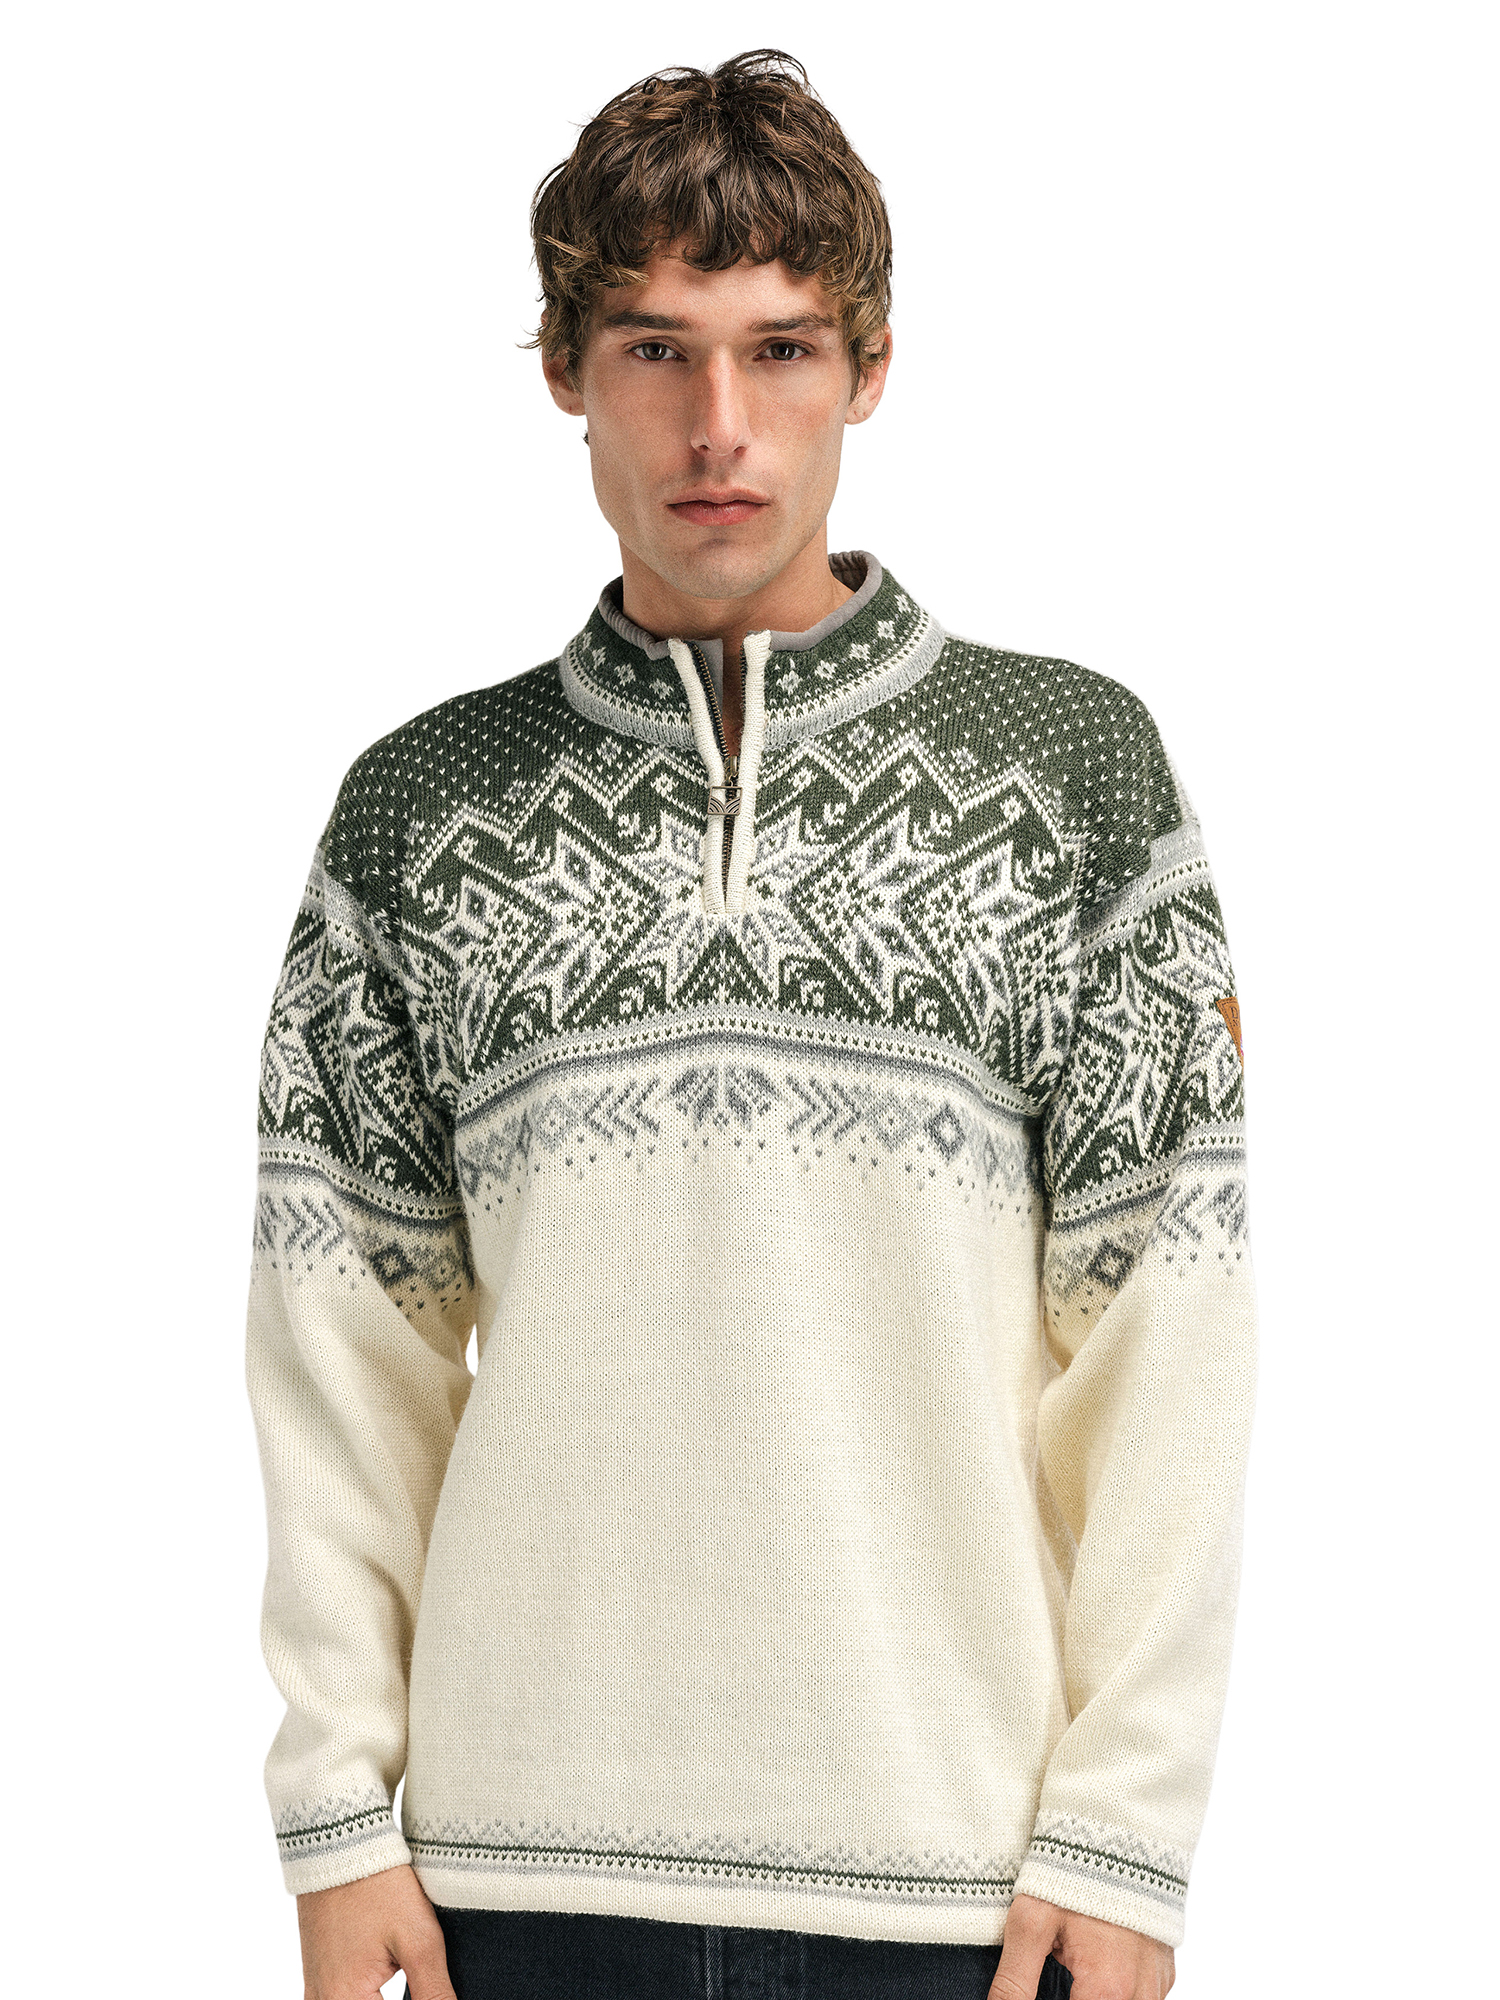 Vail Sweater - Men - Offwhite/Dark Green - Dale of Norway - Dale